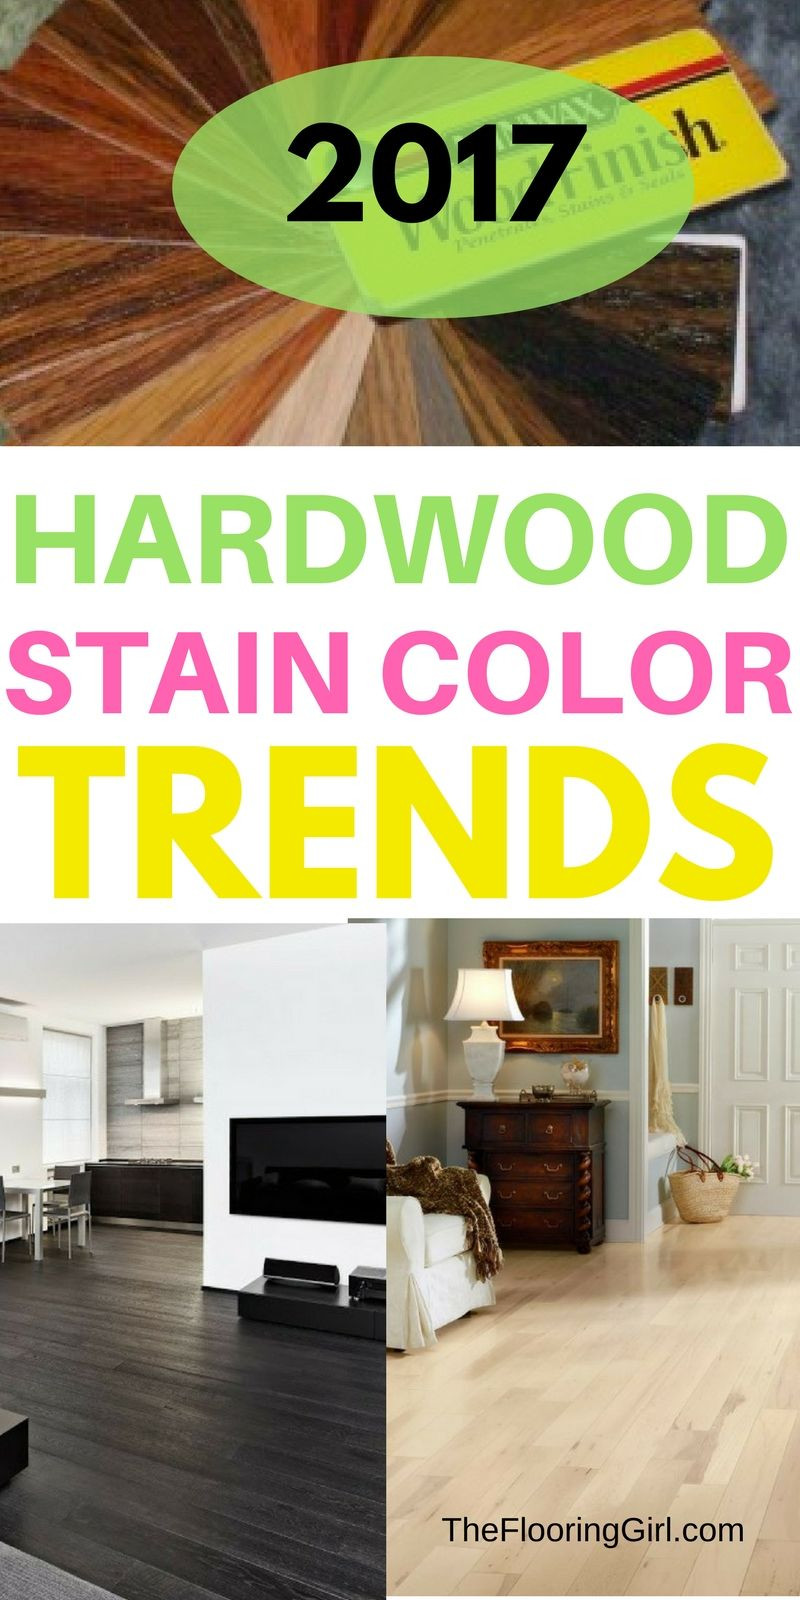 28 Fashionable Hardwood Floor Refinishing Companies Near Me 2024 free download hardwood floor refinishing companies near me of hardwood flooring stain color trends 2018 more from the flooring for hardwood flooring stain color trends for 2017 hardwood colors that are in